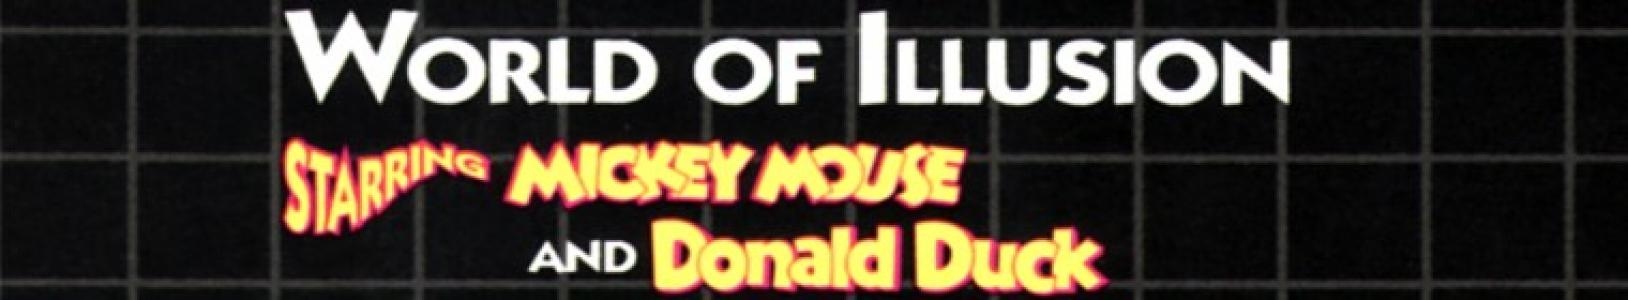 World of Illusion Starring Mickey Mouse and Donald Duck banner